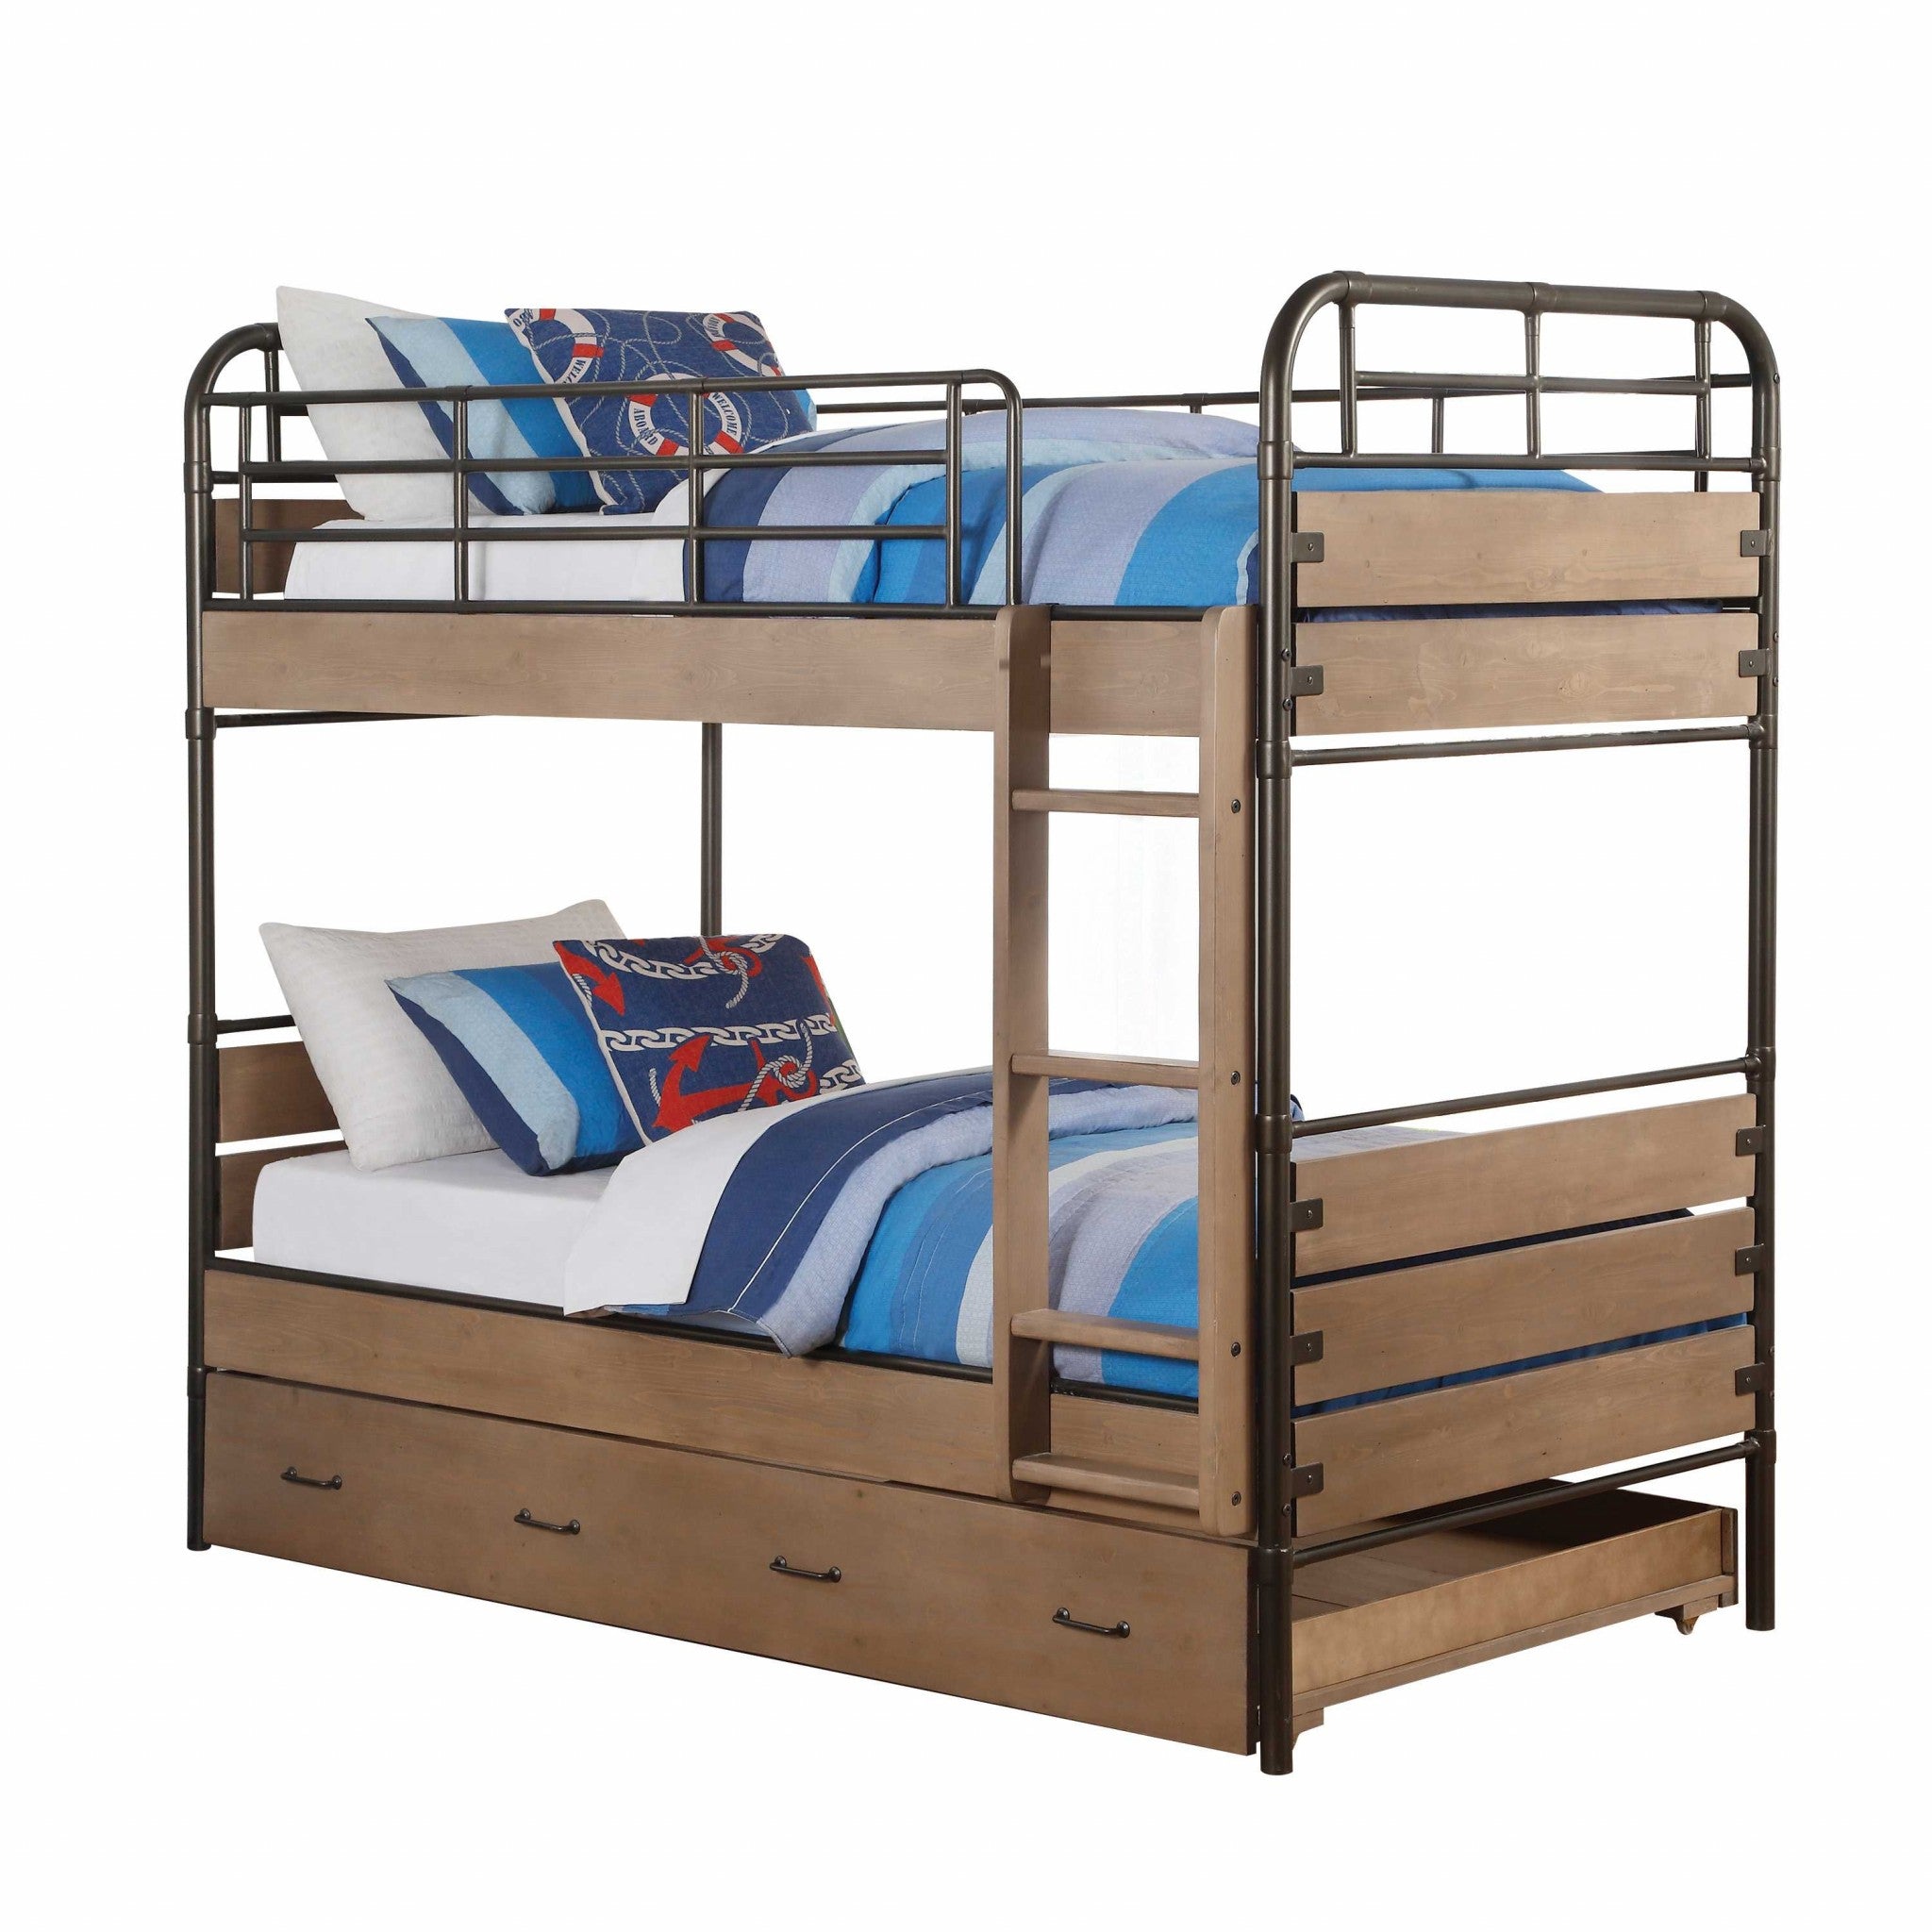 79" X 42" X 71" Antique Oak And Gunmetal Twin Over Twin Bunk Bed Default Title